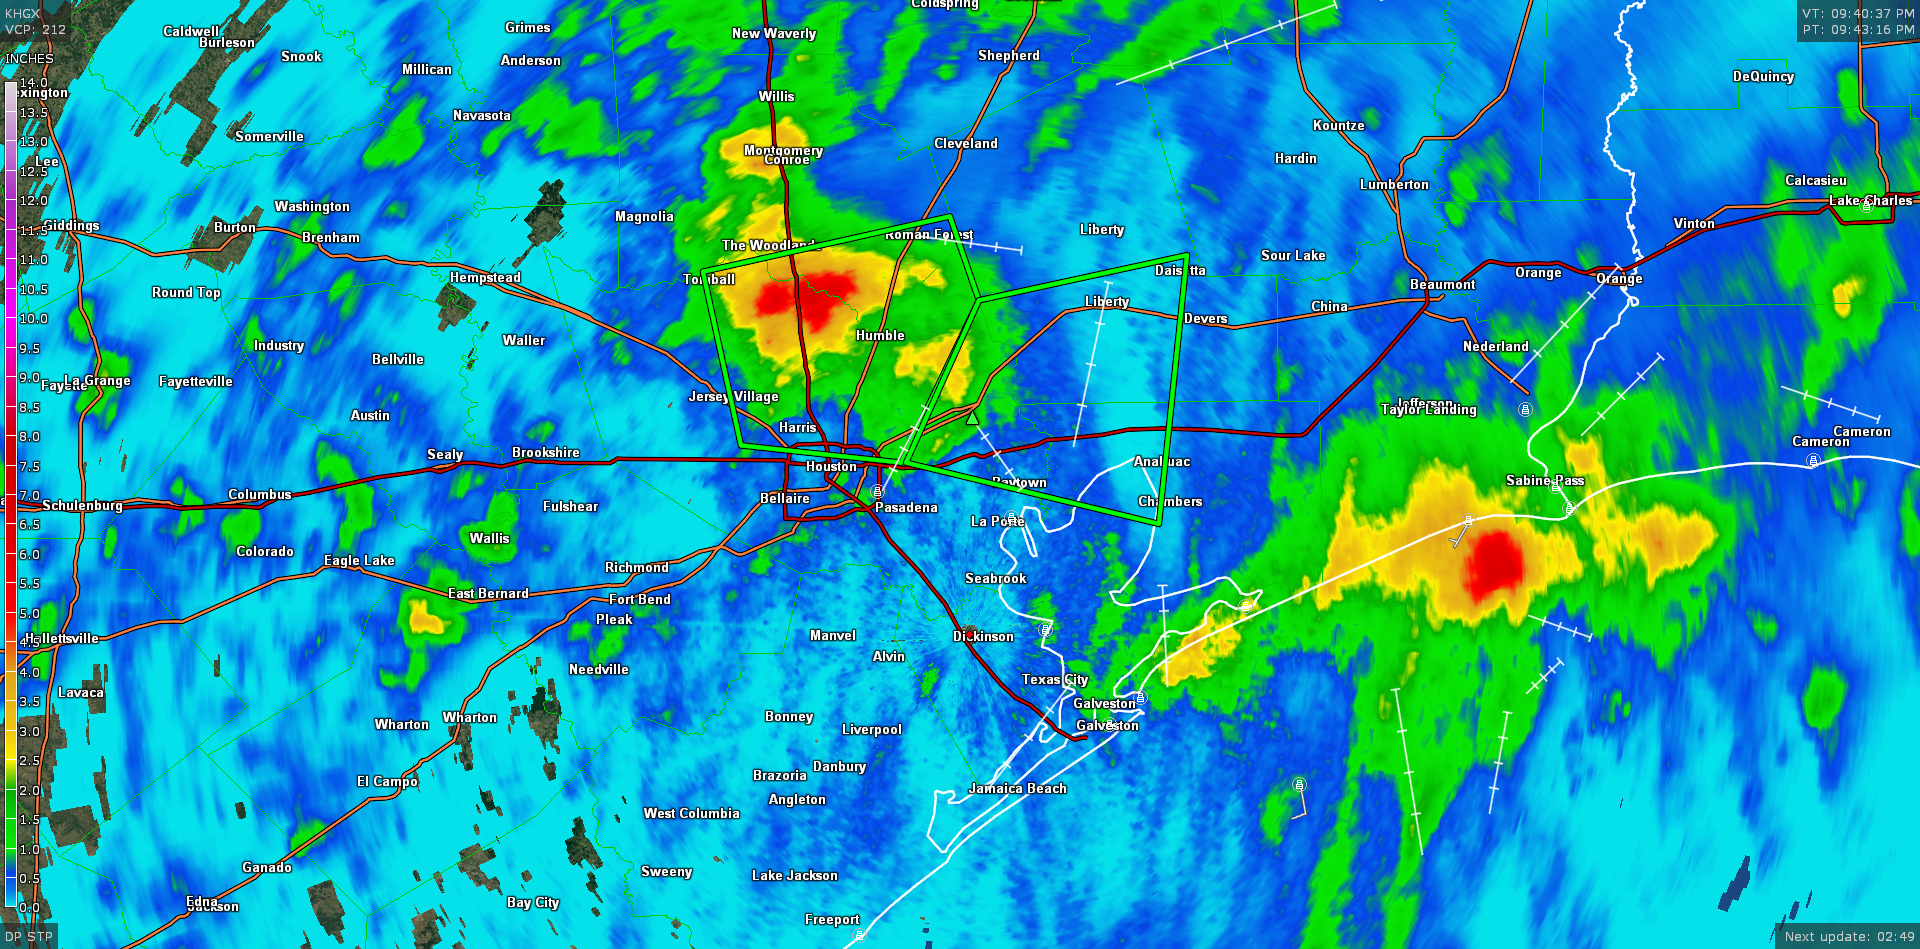 Area-wide view  of radar estimated rainfall today. (GRLevel3)